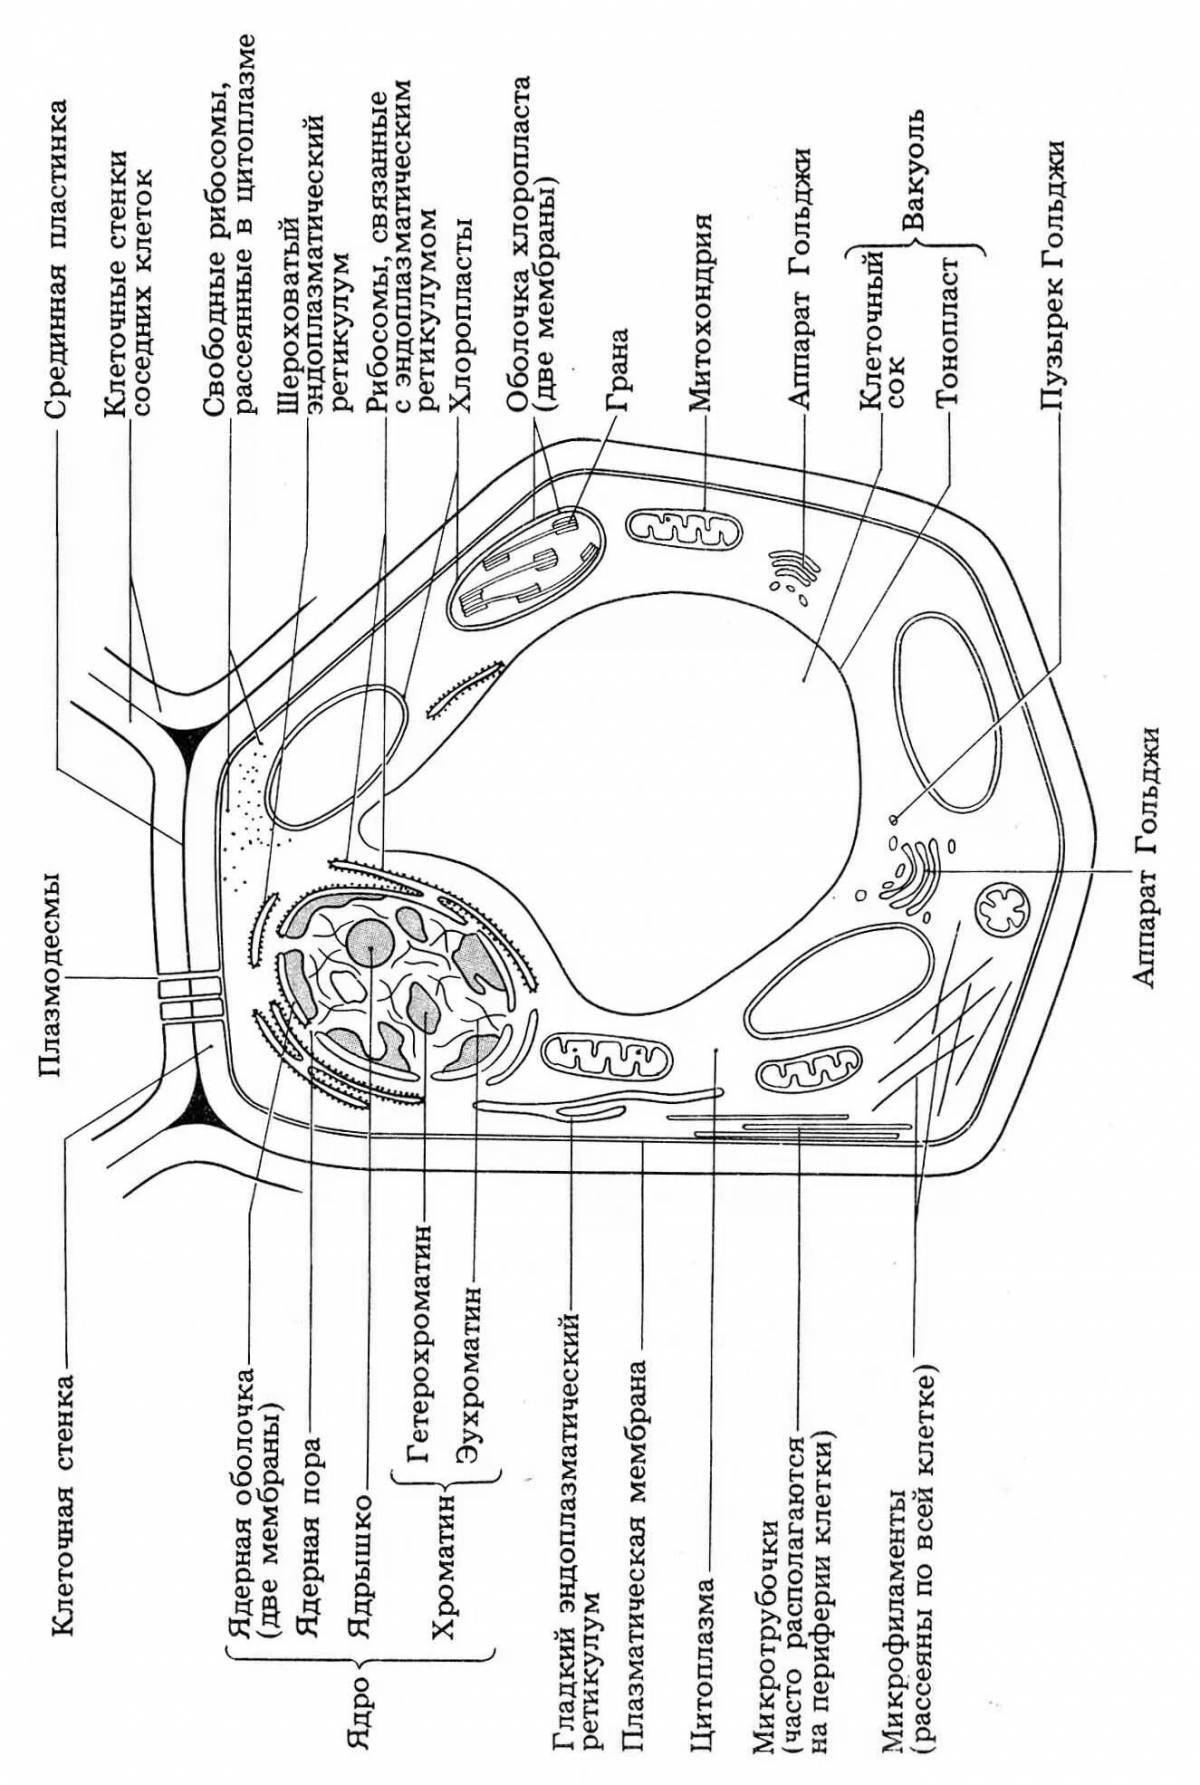 Living plant cell coloring page